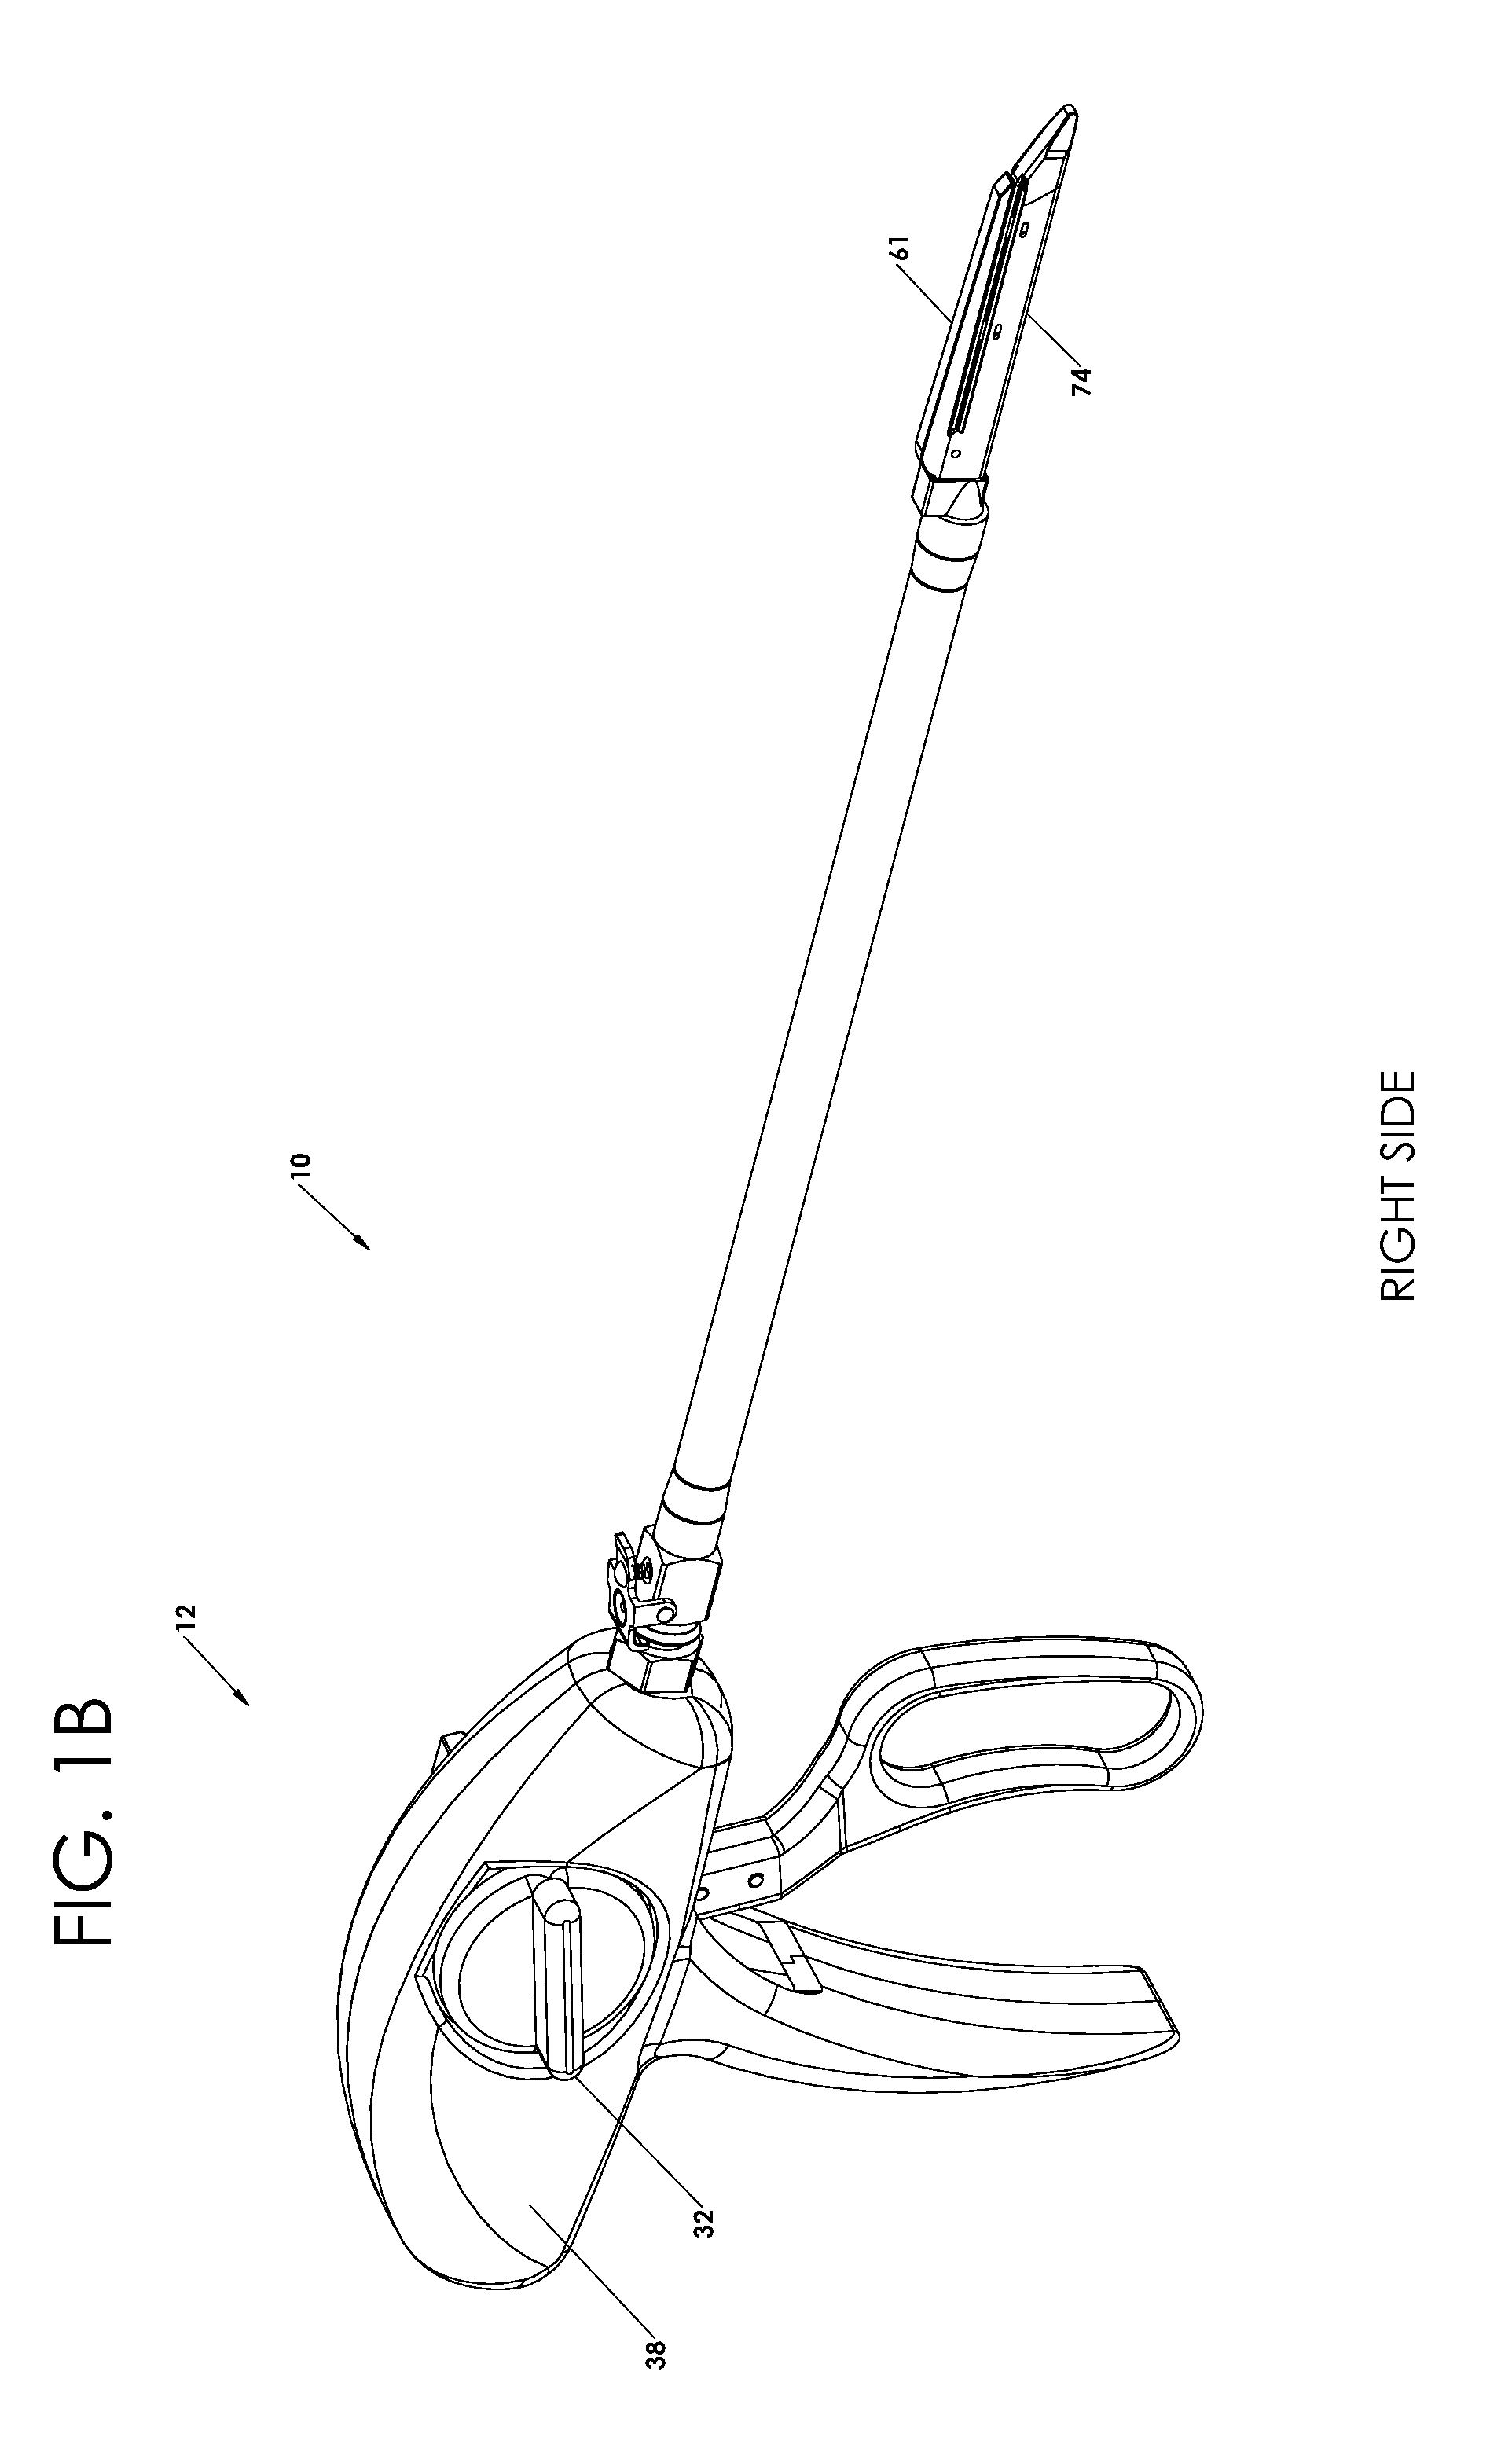 Delivery Applicator for Radioactive Staples for Brachytherapy Medical Treatment